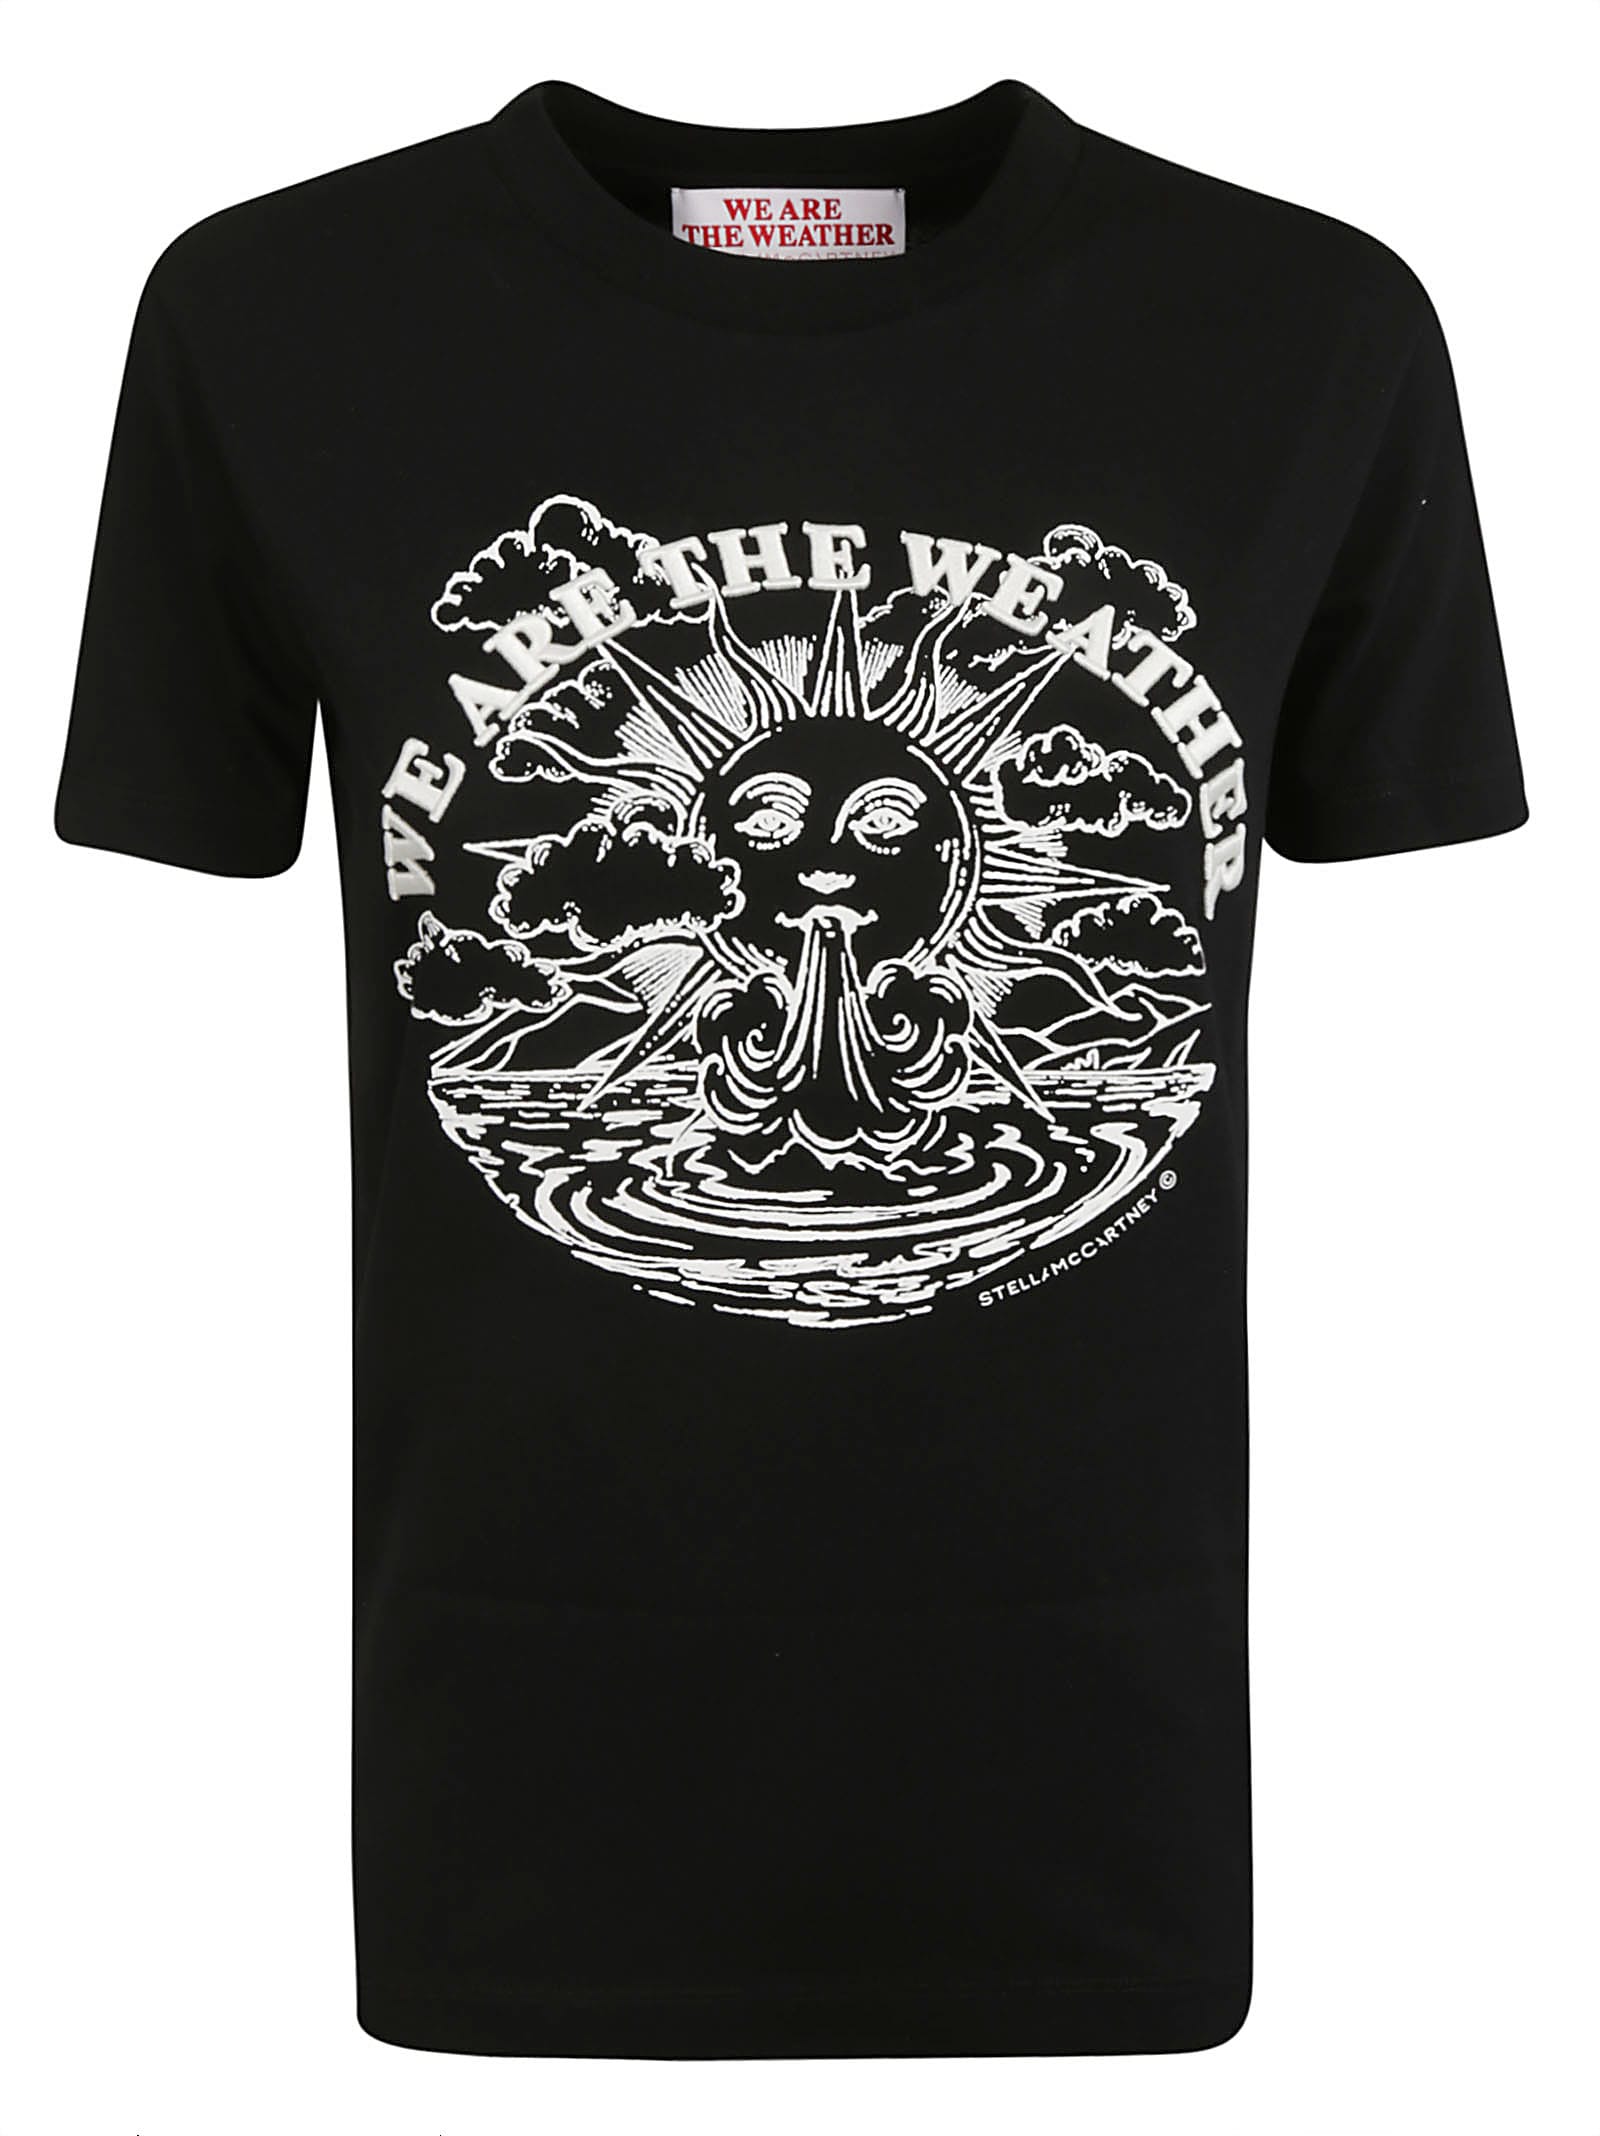 STELLA MCCARTNEY WE ARE THE WEATHER T-SHIRT,11228482